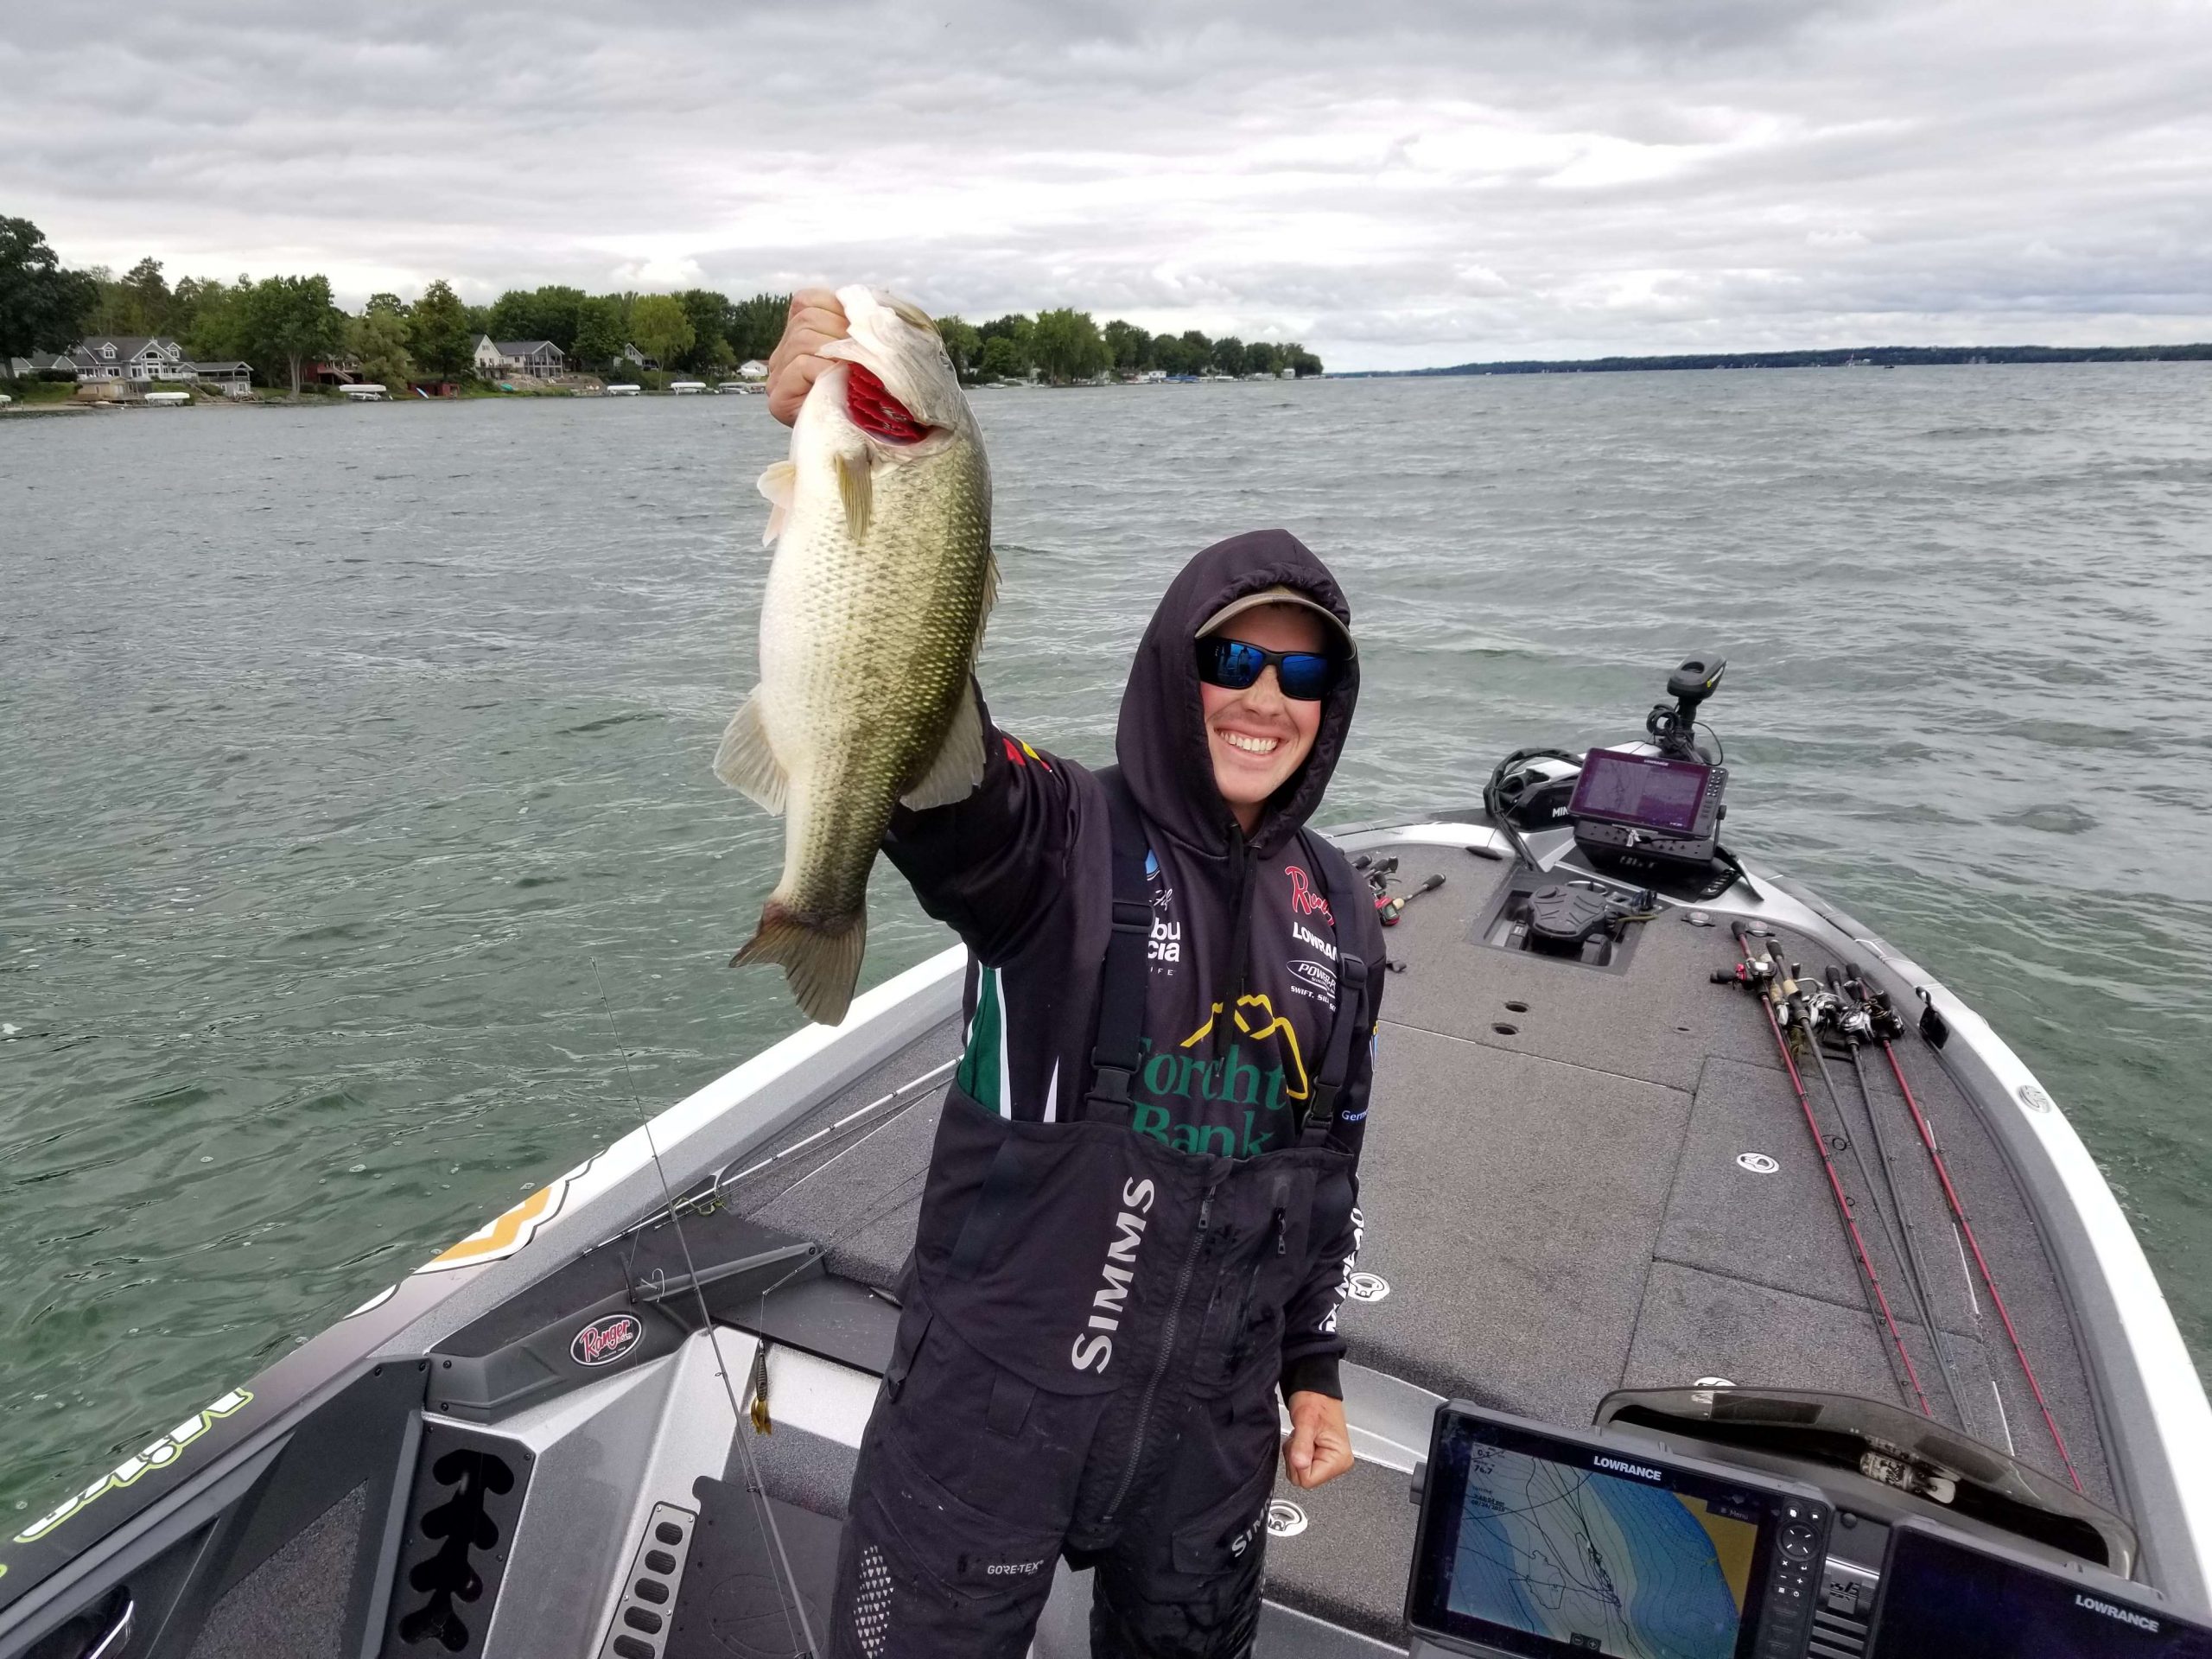 Mike Huff finishing strong on Day 3 of the SiteOne Bassmaster Elite at Cayuga Lake. 